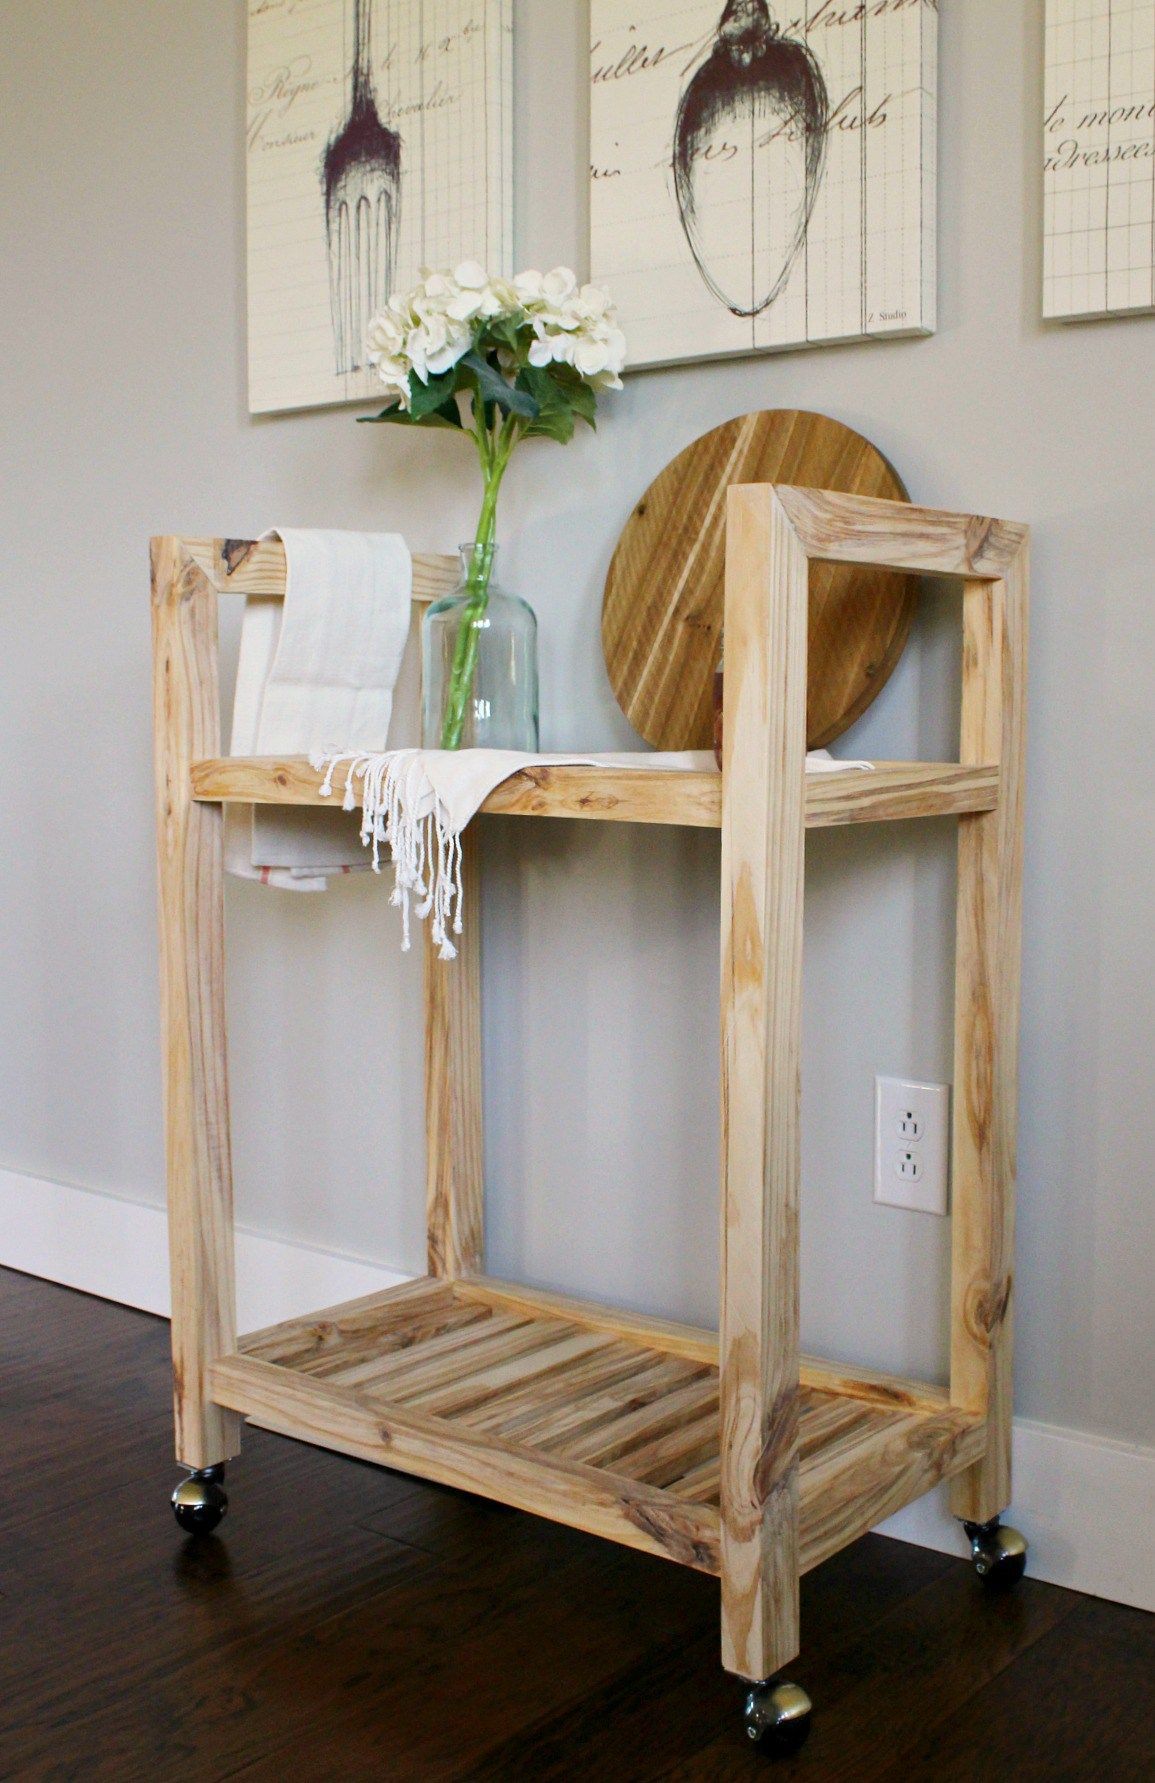 DIY Bar Cart from a Single Board--2x4 and More Challenge -   16 diy projects Apartment bar carts ideas